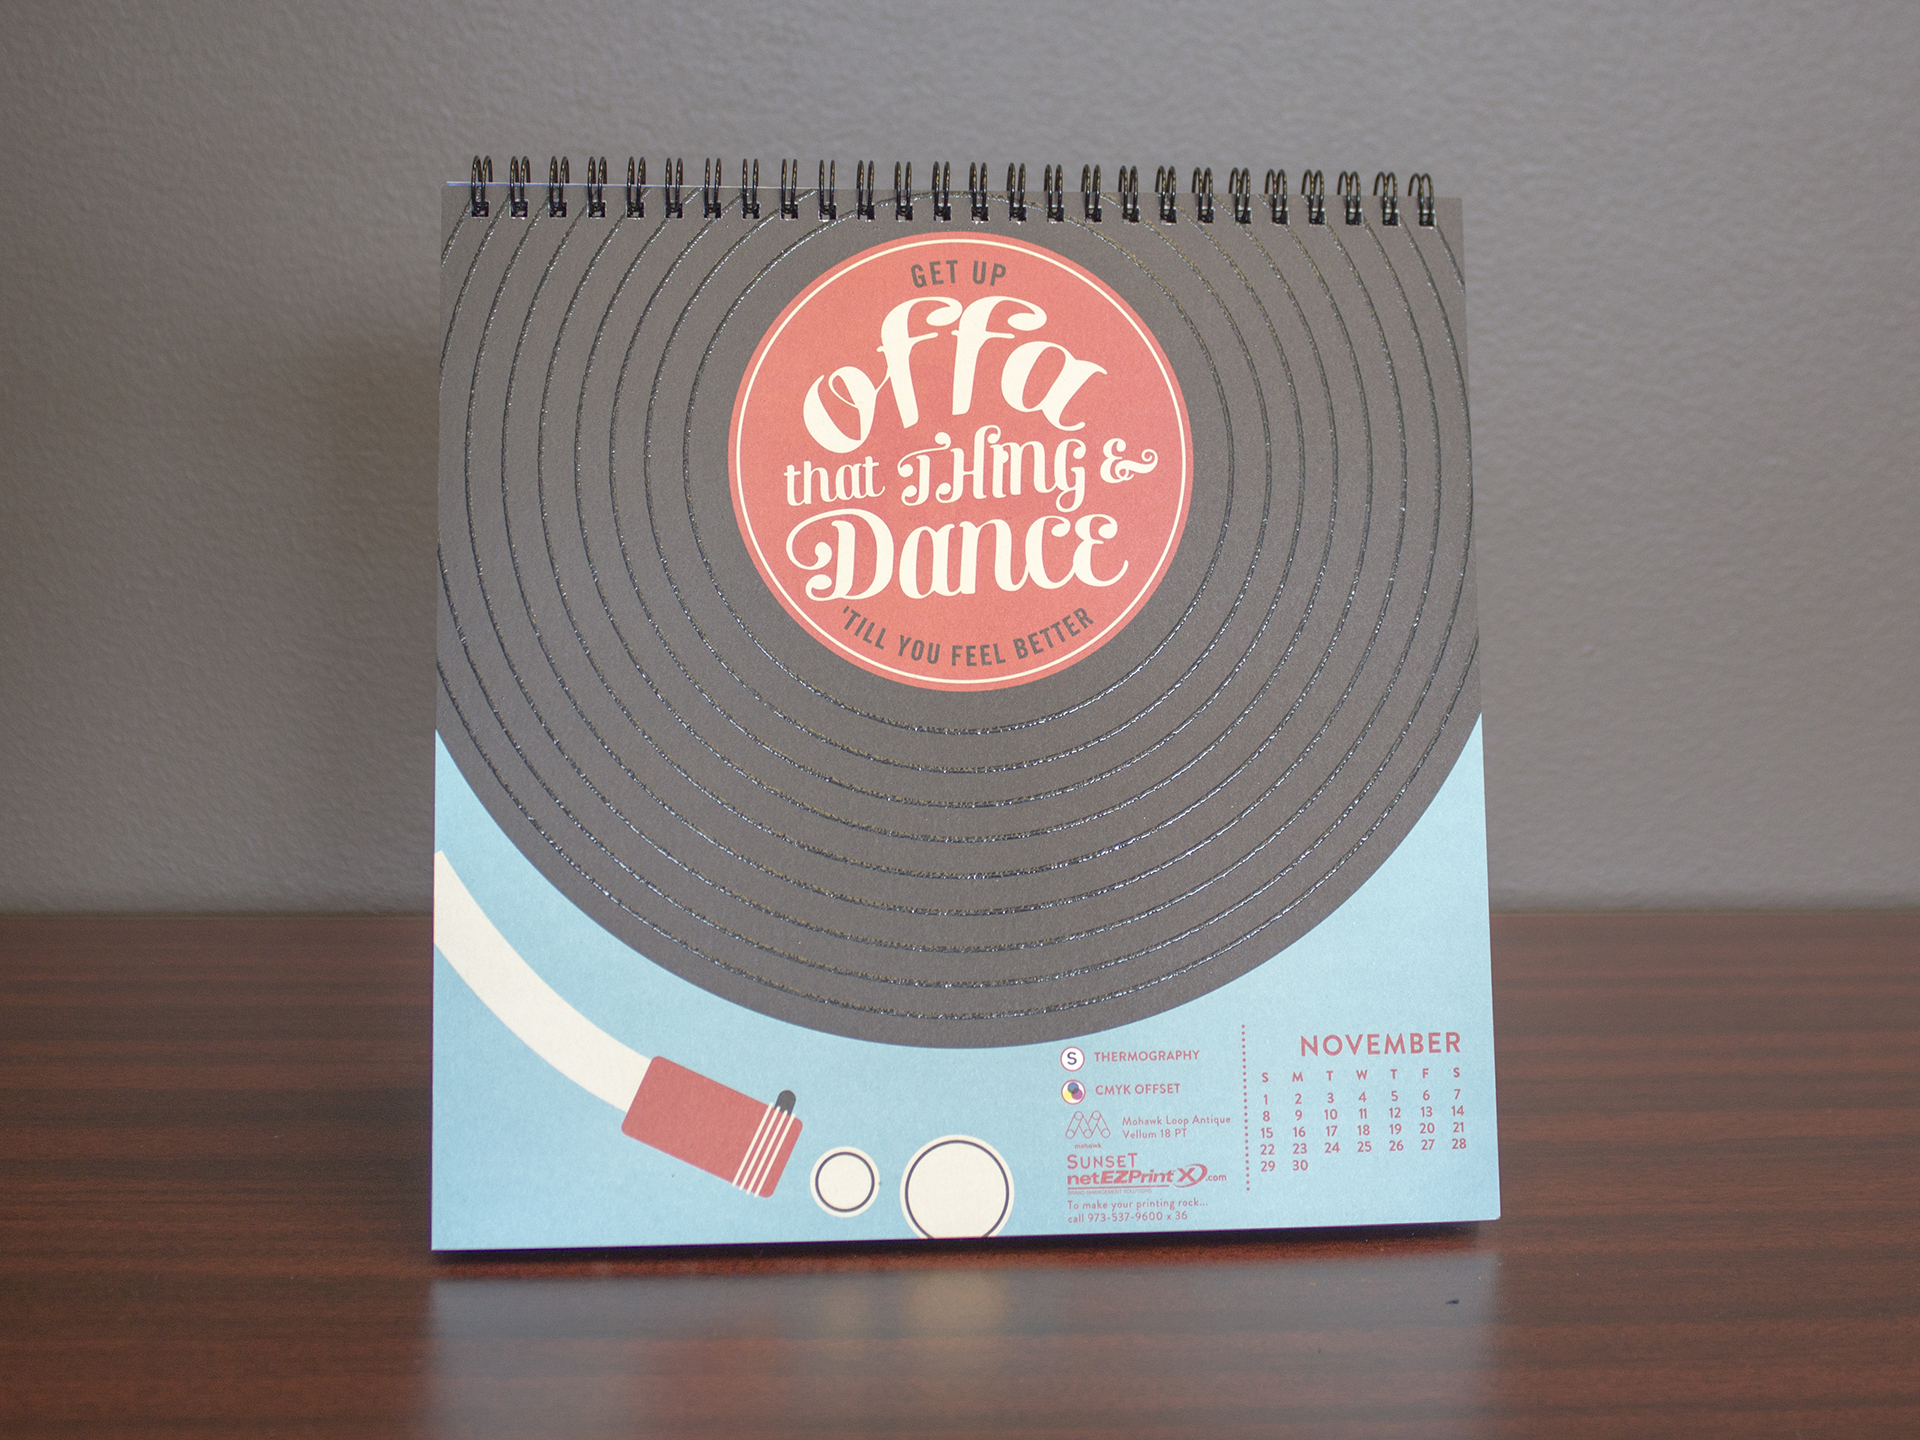 Inner view of the calendar showing a vinyl record on a turntable